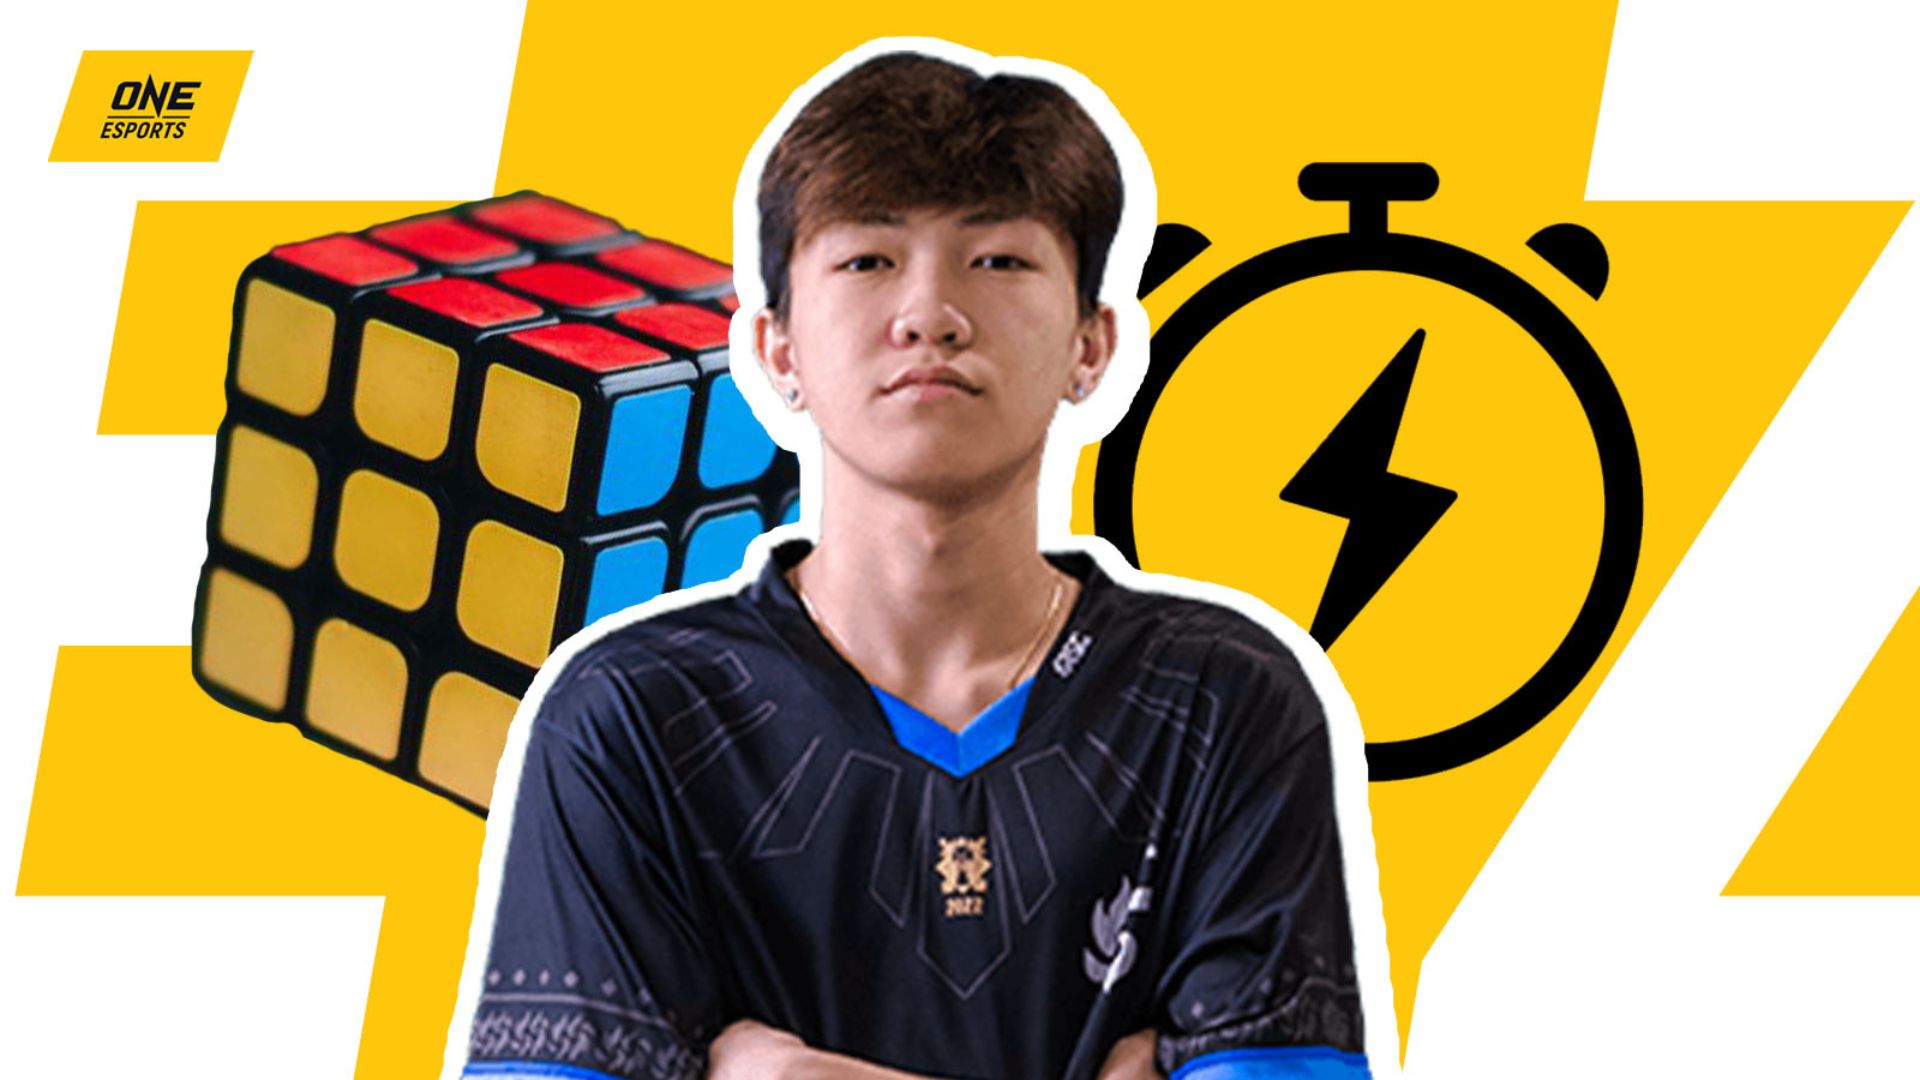 Exclusive: MLBB pro RSG Irrad is so smart and so fast, he can start a second career in Rubik’s Cube - ONE Esports